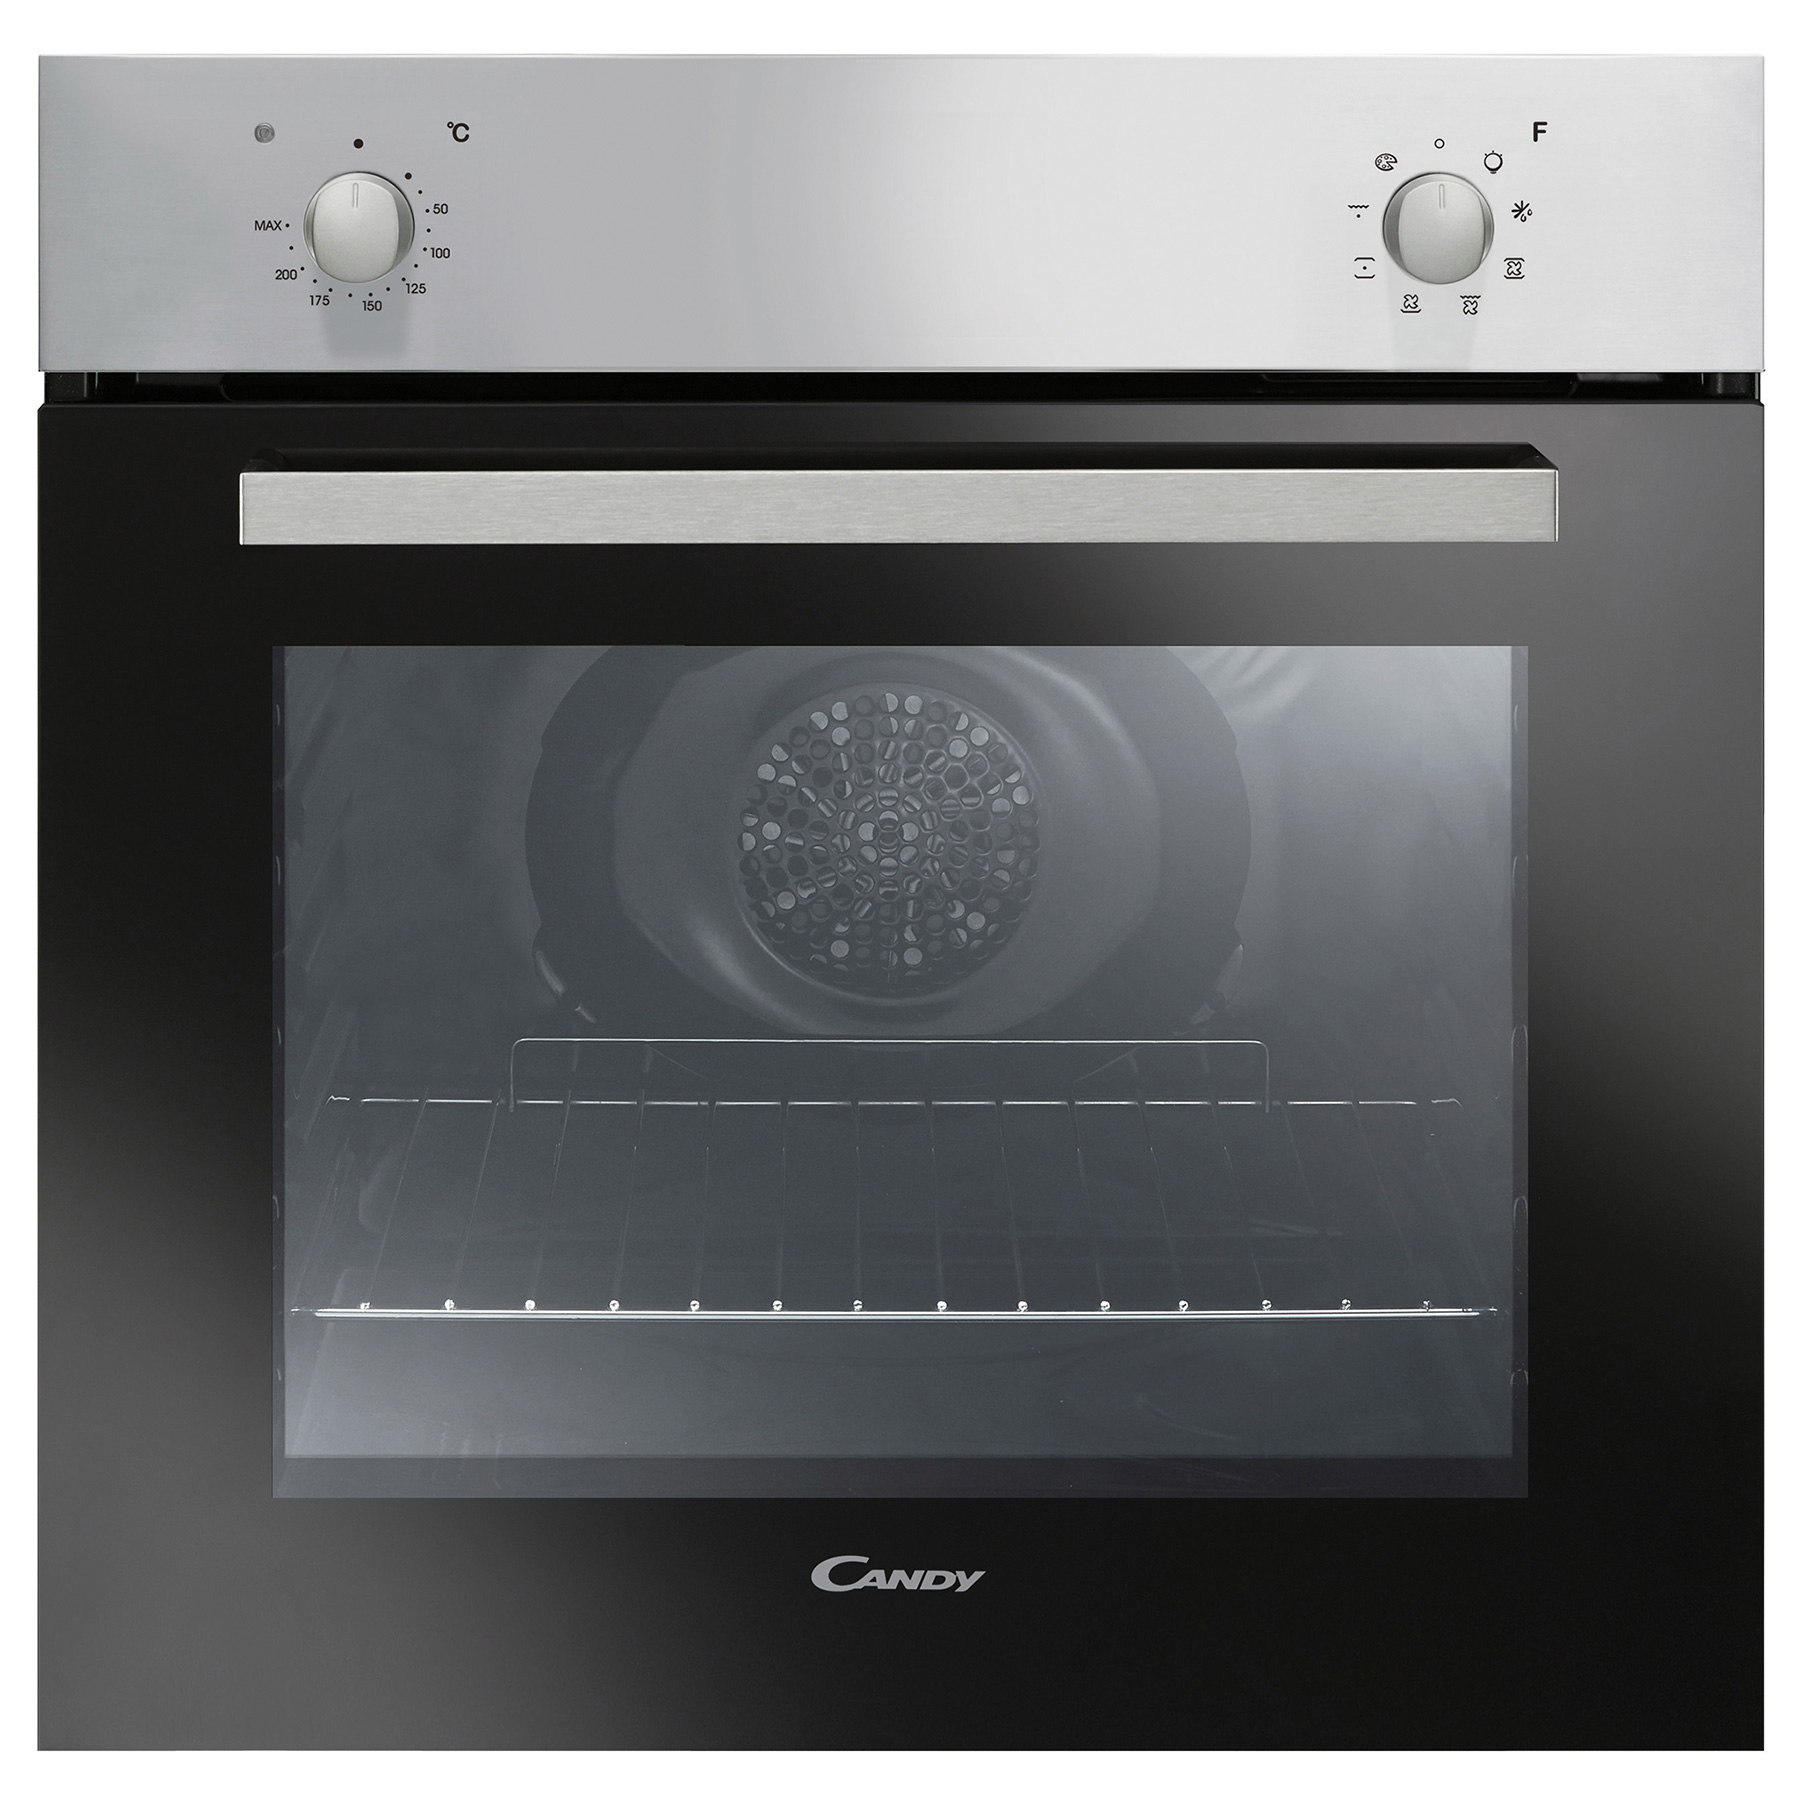 Image of Candy FCP600XE Built In Electric Single Oven in St Steel 65L A Rated